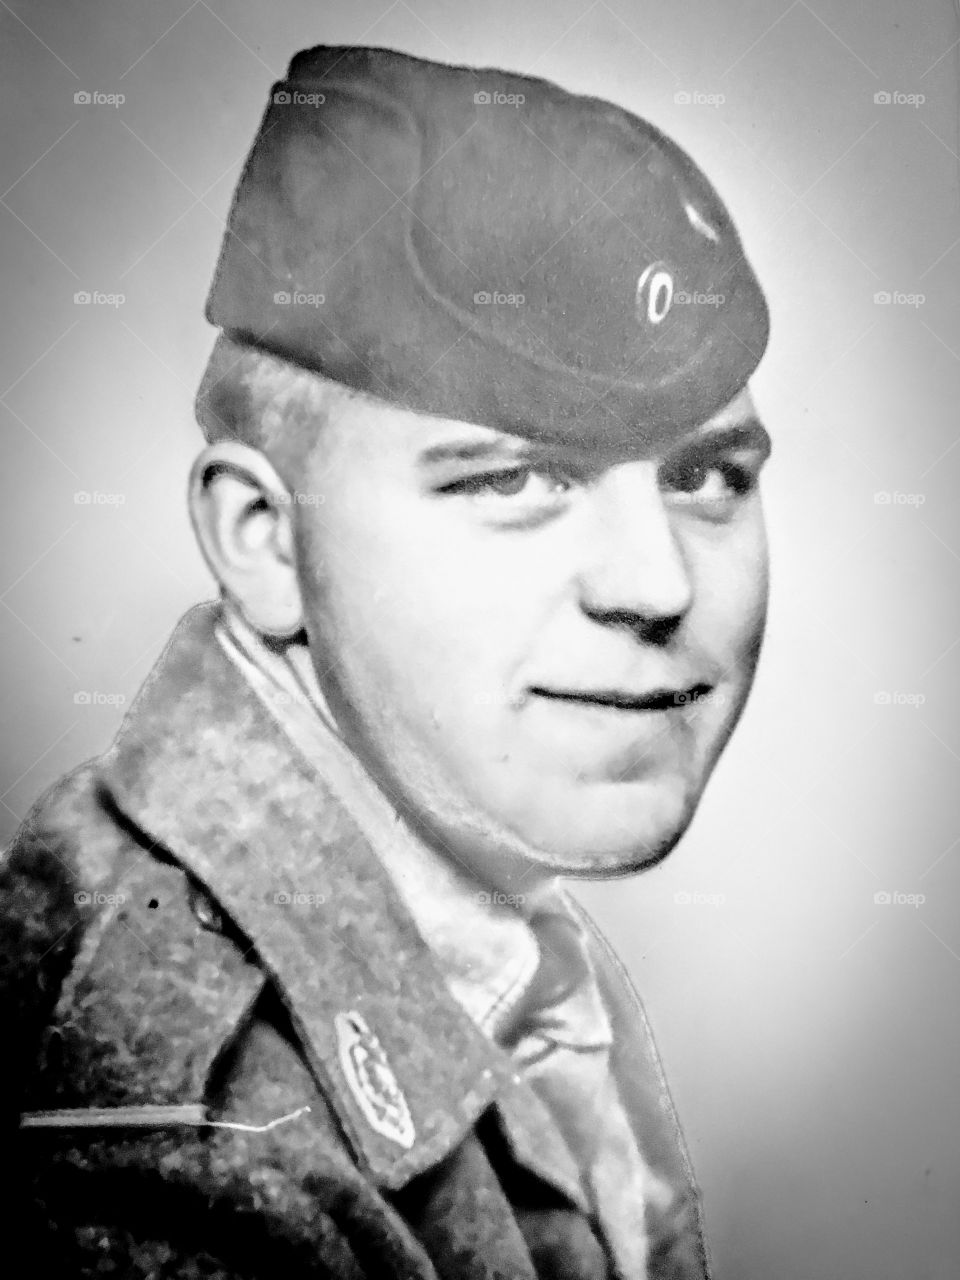 My uncle as a soldier